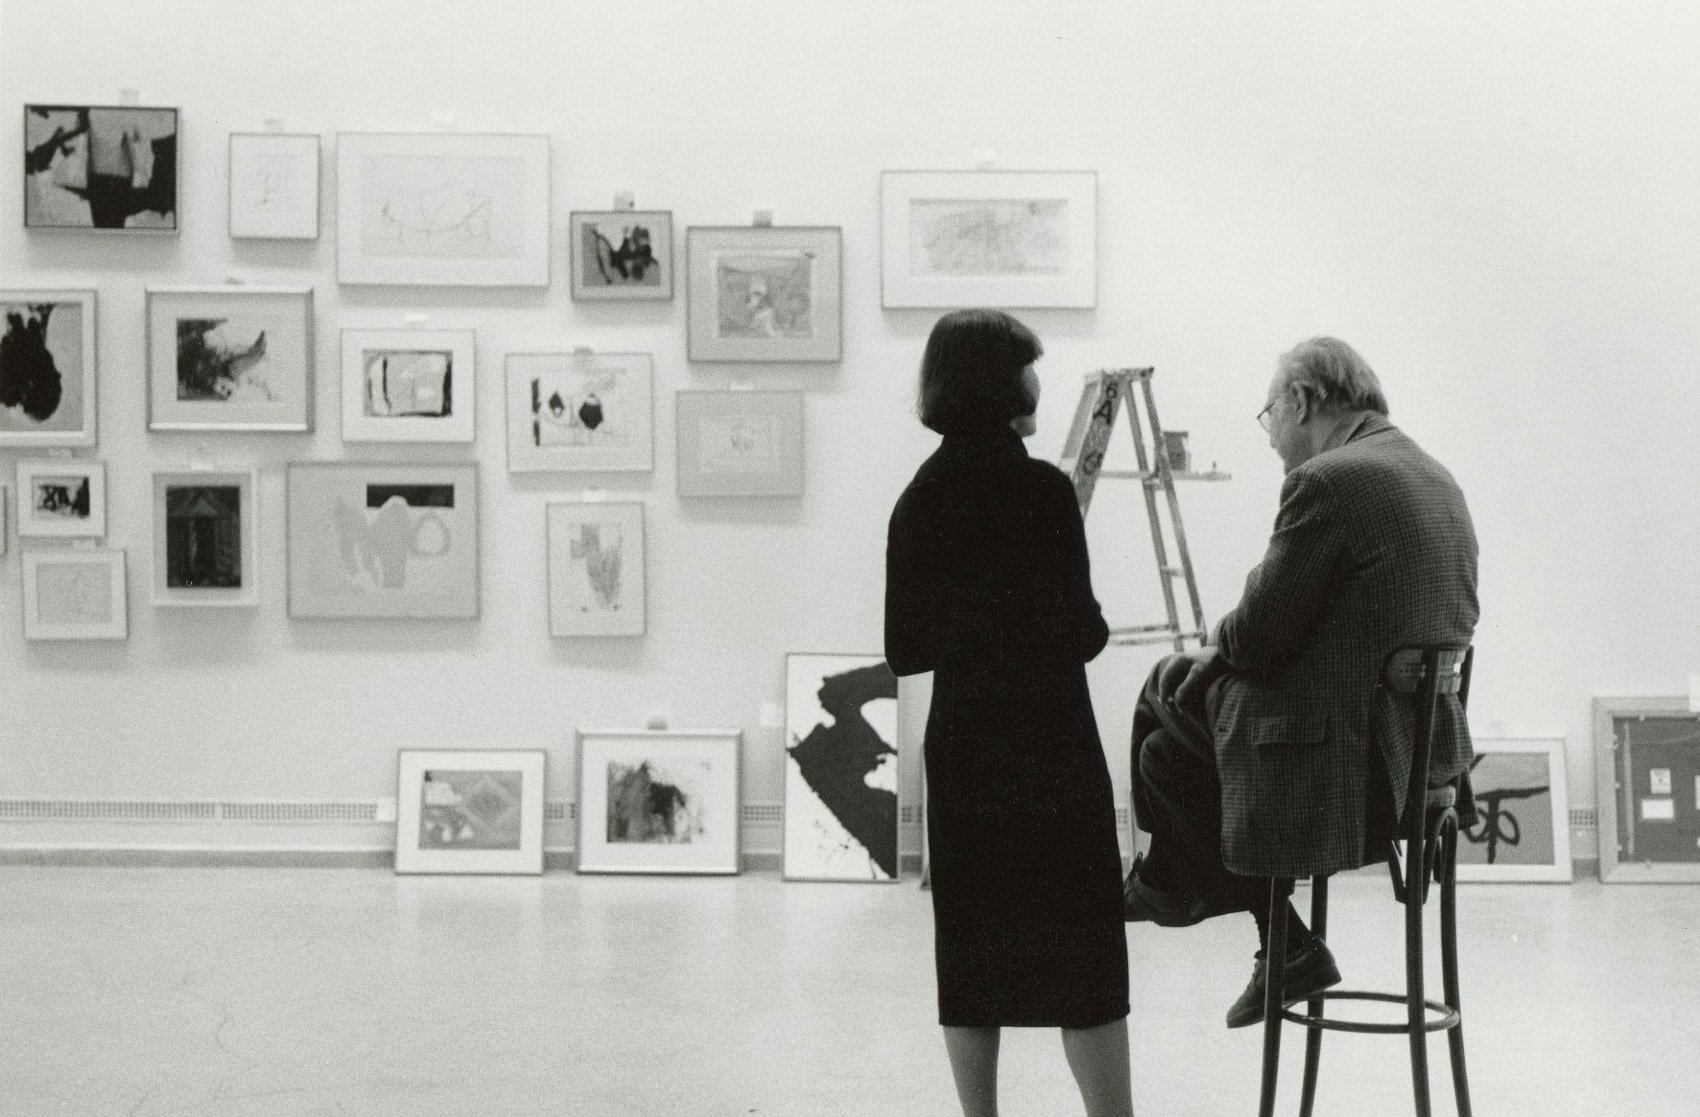 Motherwell and curator Diane Waldman during the installation of Motherwell’s 1984 retrospective at the Solomon R. Guggenheim Museum